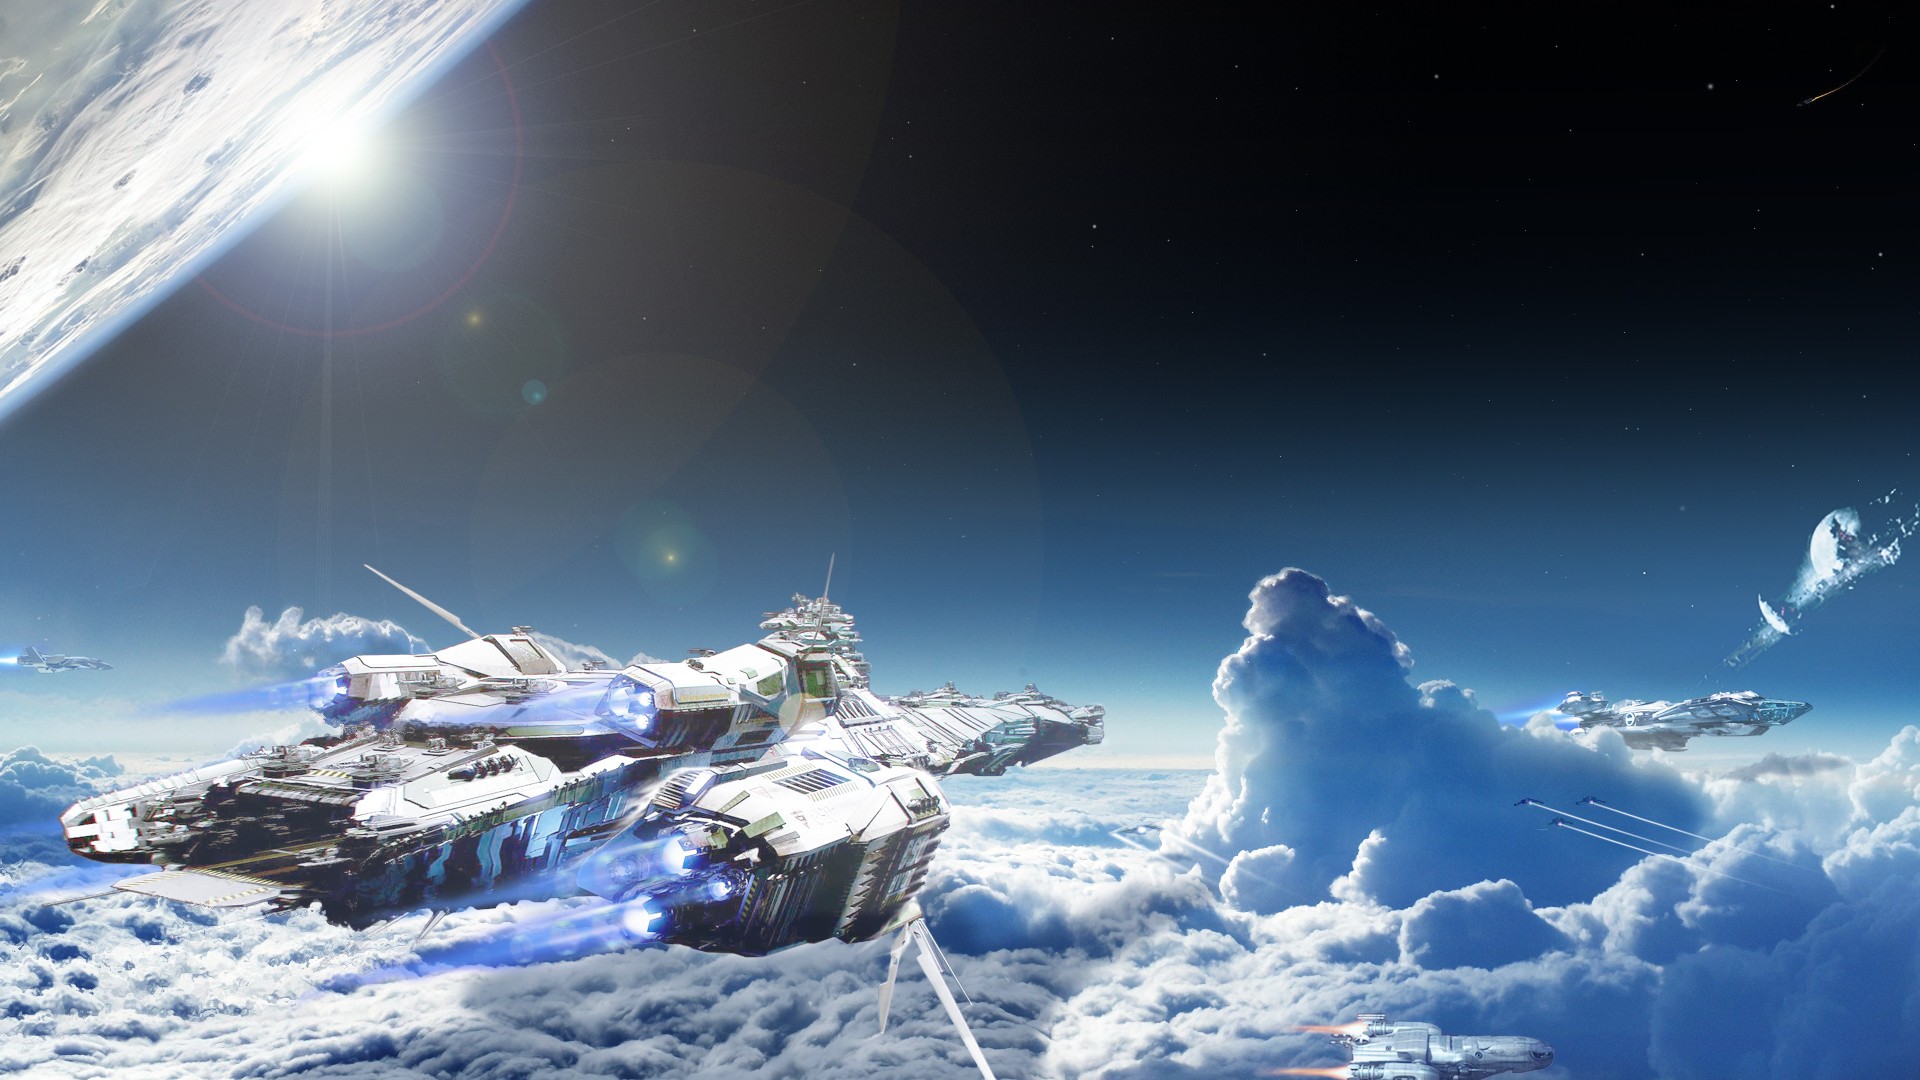 General 1920x1080 Dreadnought Star Citizen space clouds lens flare planet video game art PC gaming science fiction